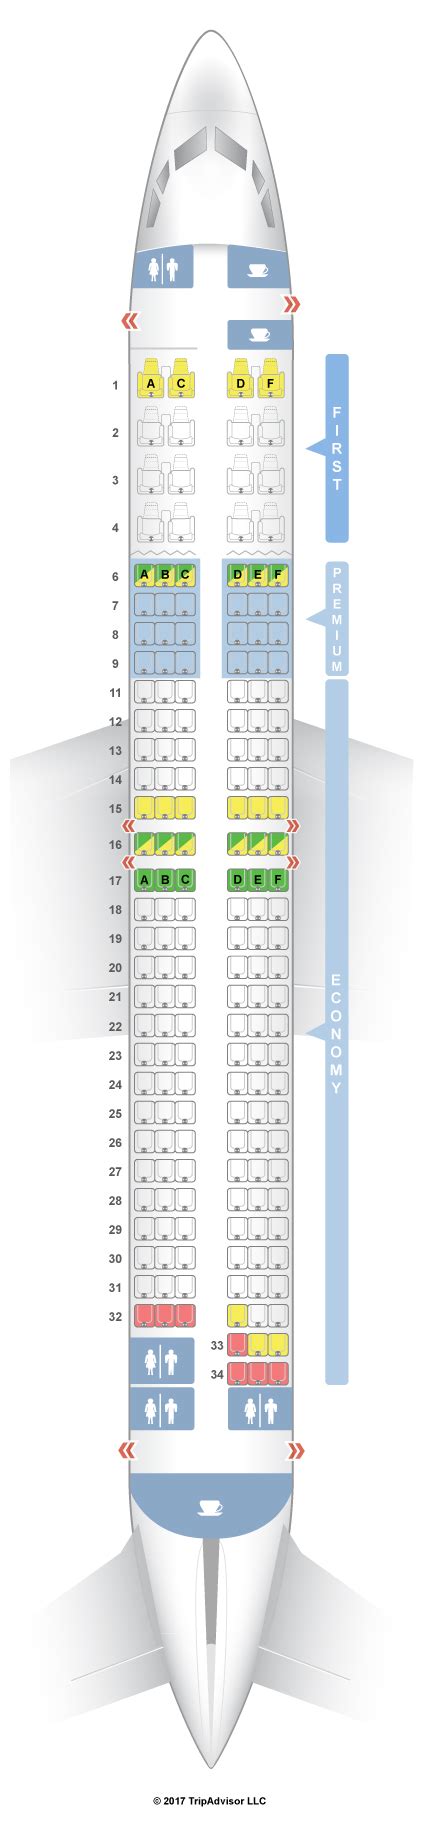 For your next Alaska Airlines flight, use this seating chart to get the most comfortable seats, legroom, ... Boeing 737-700 (737) Boeing 737-800 (738) Boeing 737-900 (739) Bombardier Q400; Embraer 175 (E75) Check-in ... SeatGuru was created to help travelers choose the best seats and in-flight amenities. Forum; Mobile; FAQ; Contact Us;. 